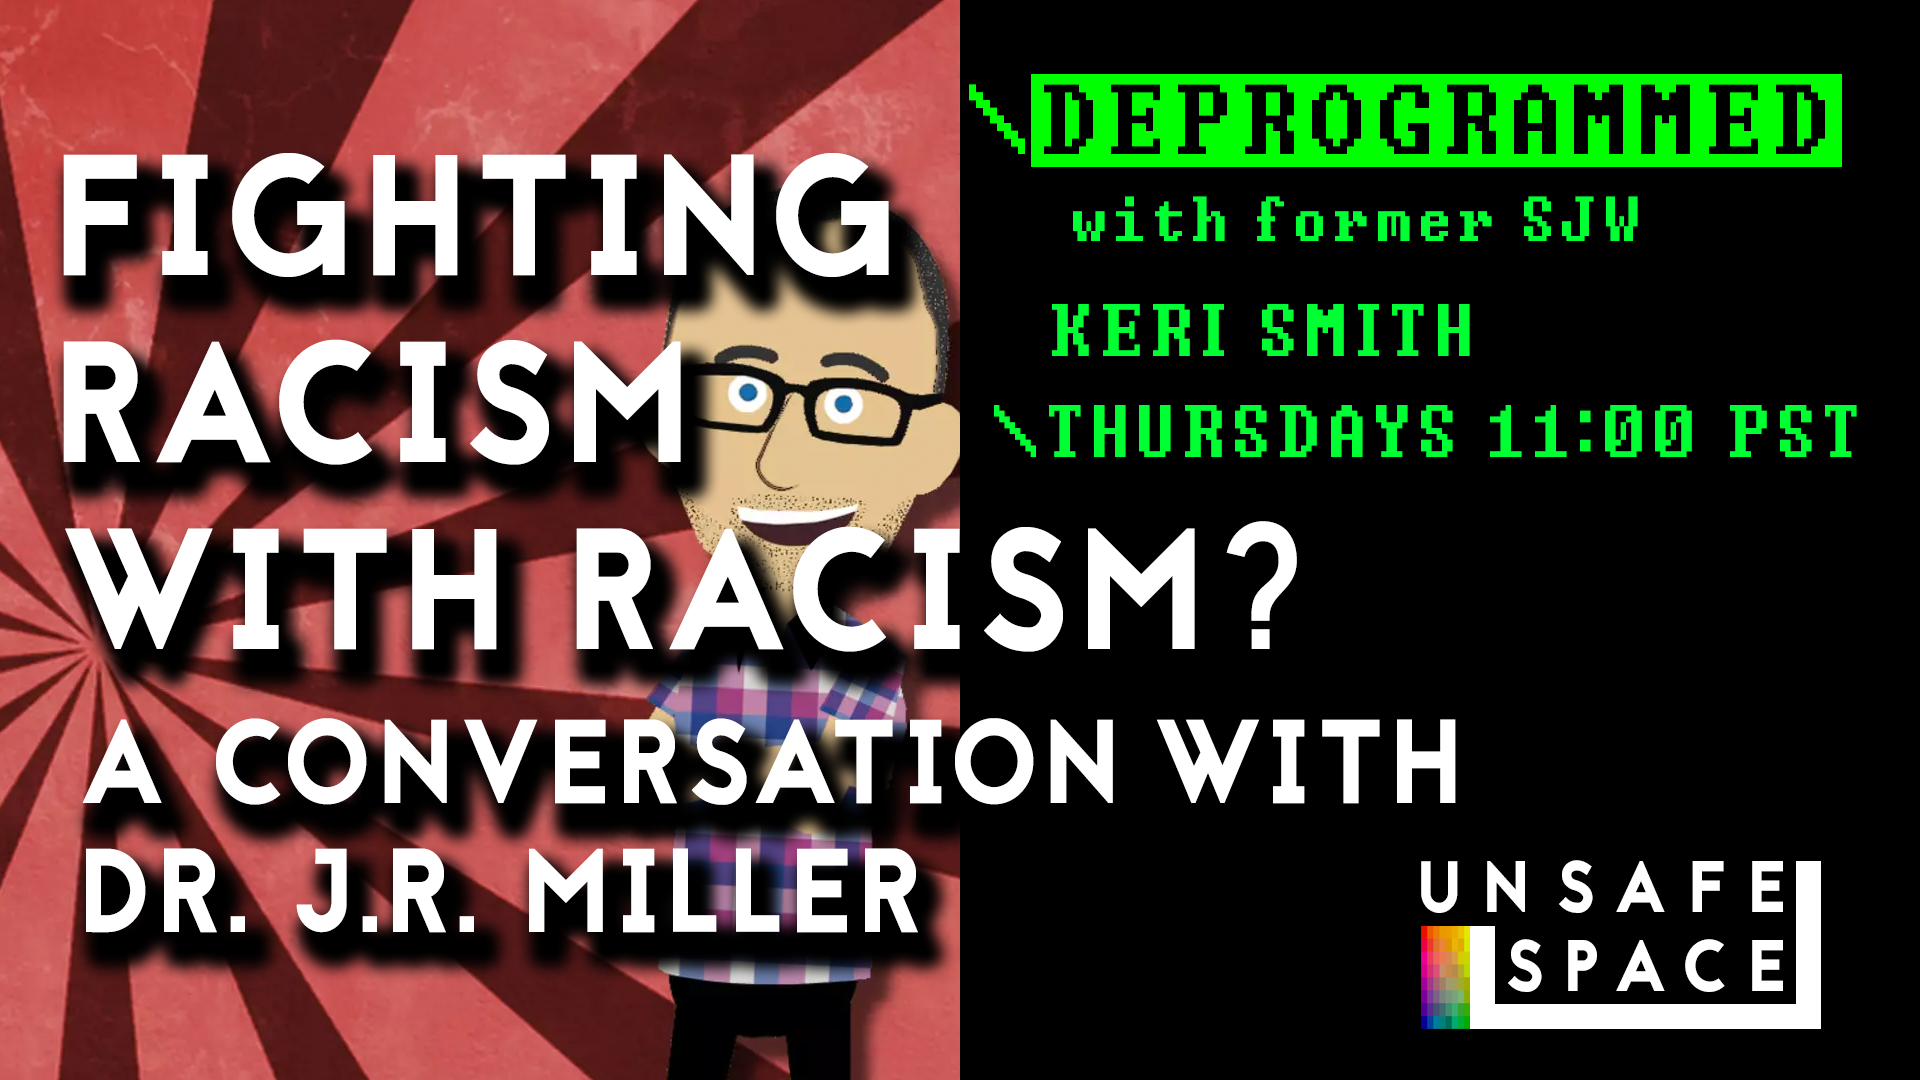 [Live: Episode 045] Deprogrammed: Fighting Racism with Racism?